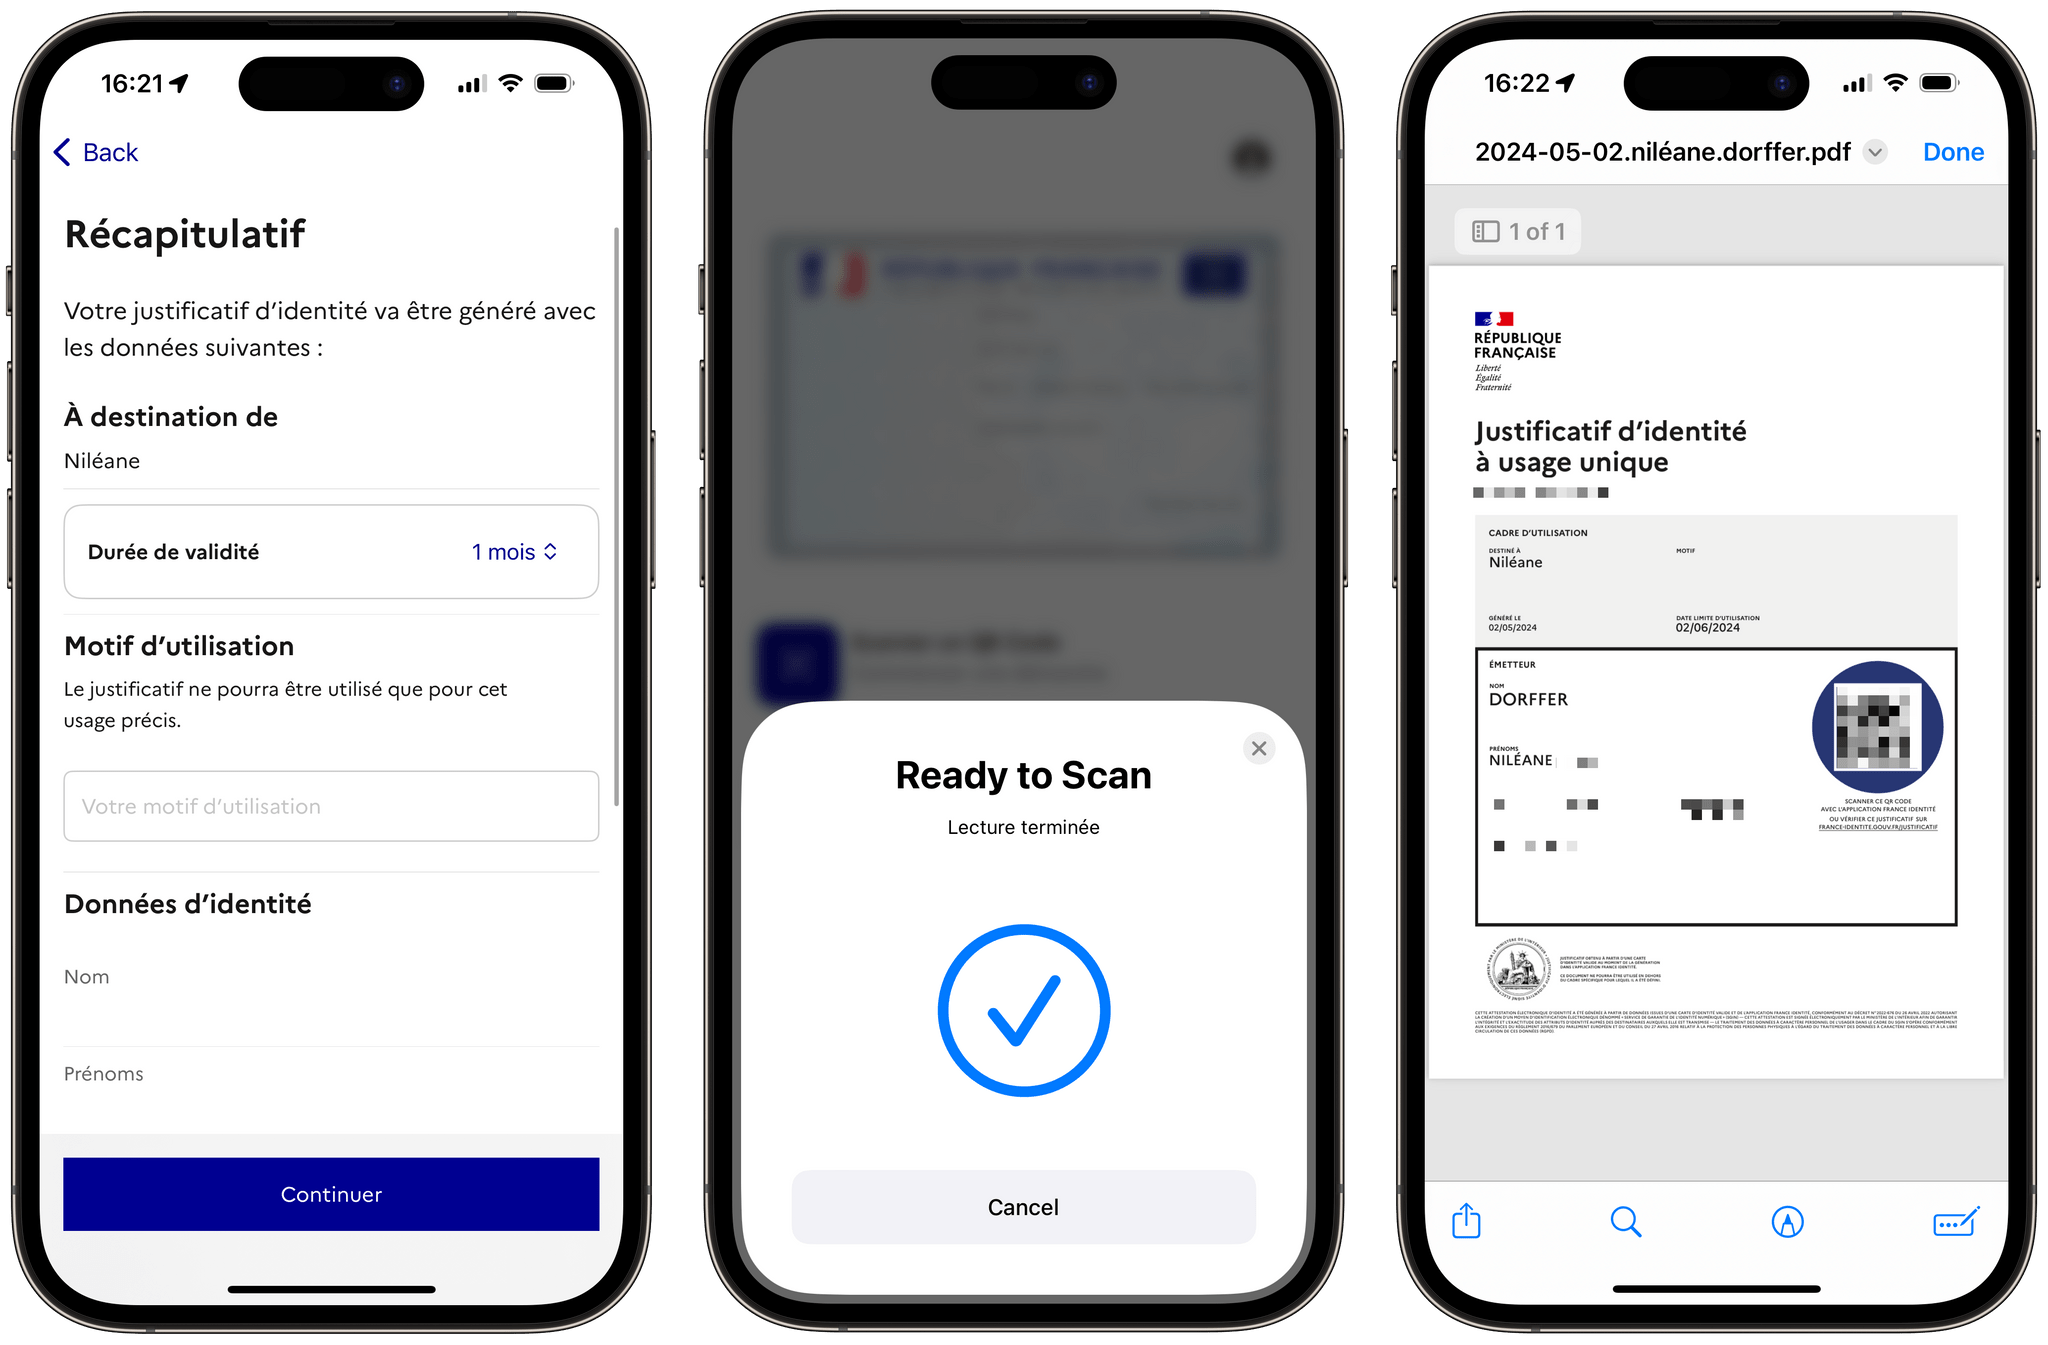 The French digital ID app can be used to generate a one-time-use proof of identity in the form of a PDF document containing a QR code.